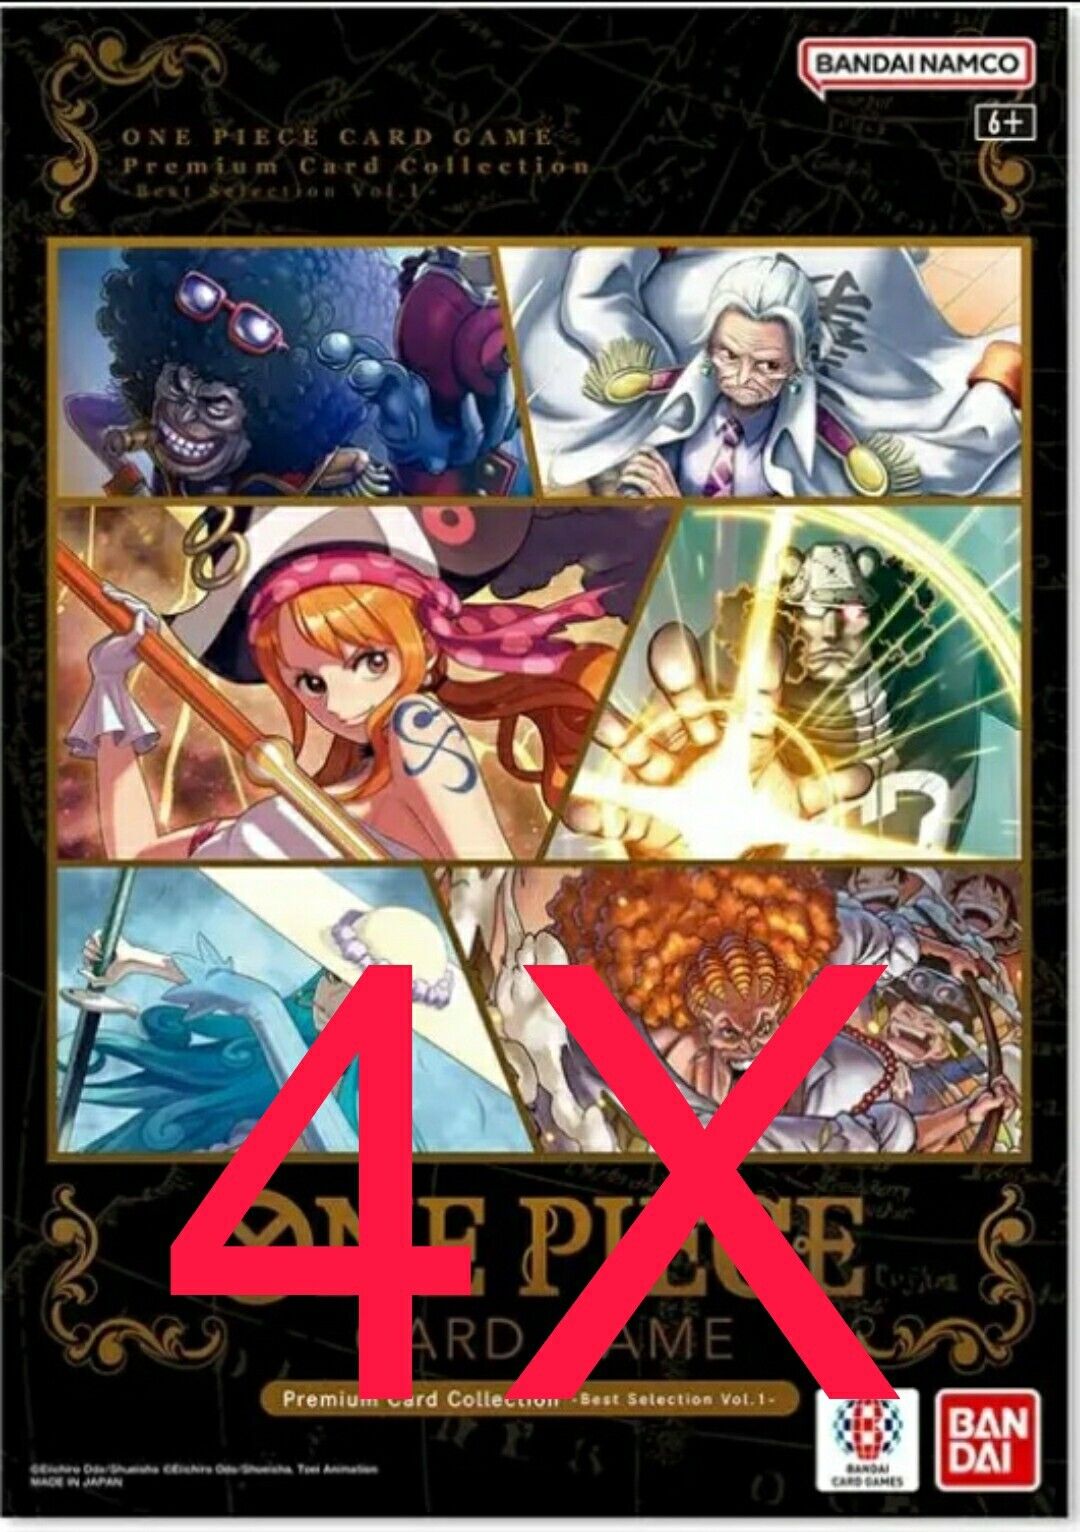 One Piece TCG 4X Premium Card Collection Best Selection ENGLISH